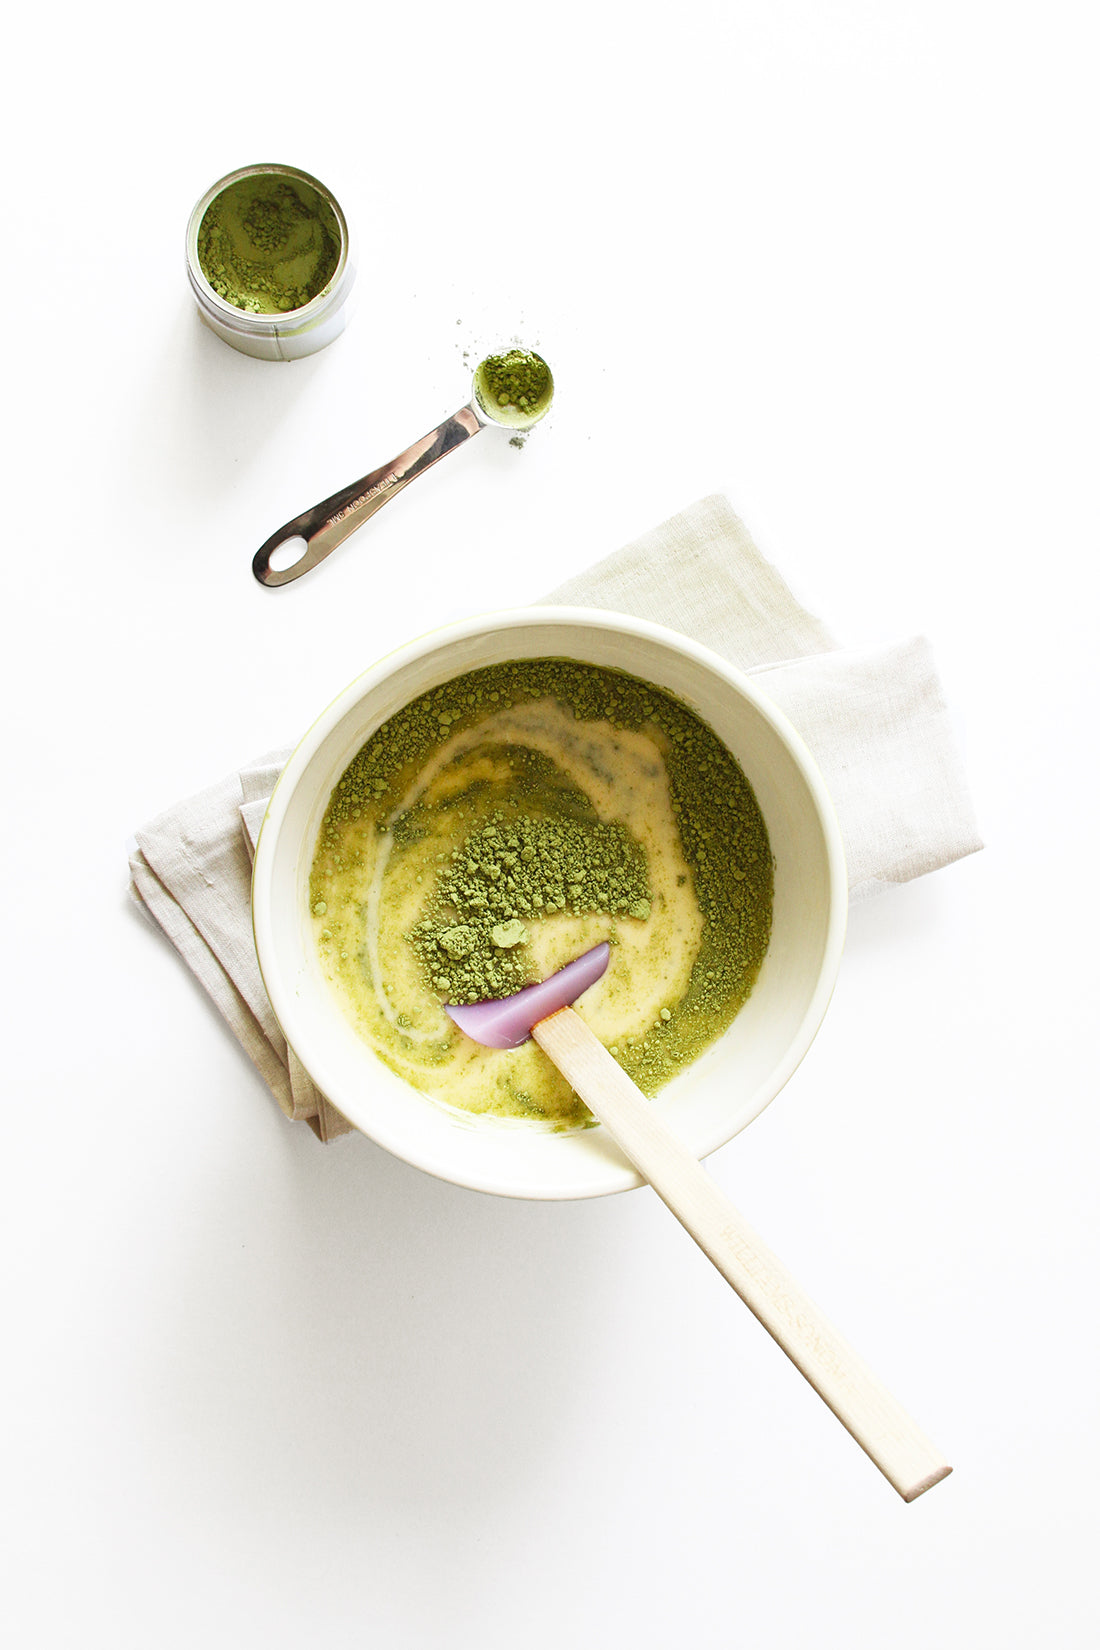 Image from above of matcha powder mixing into the batter of Miss Jones Baking Co Matcha Tea Cakes